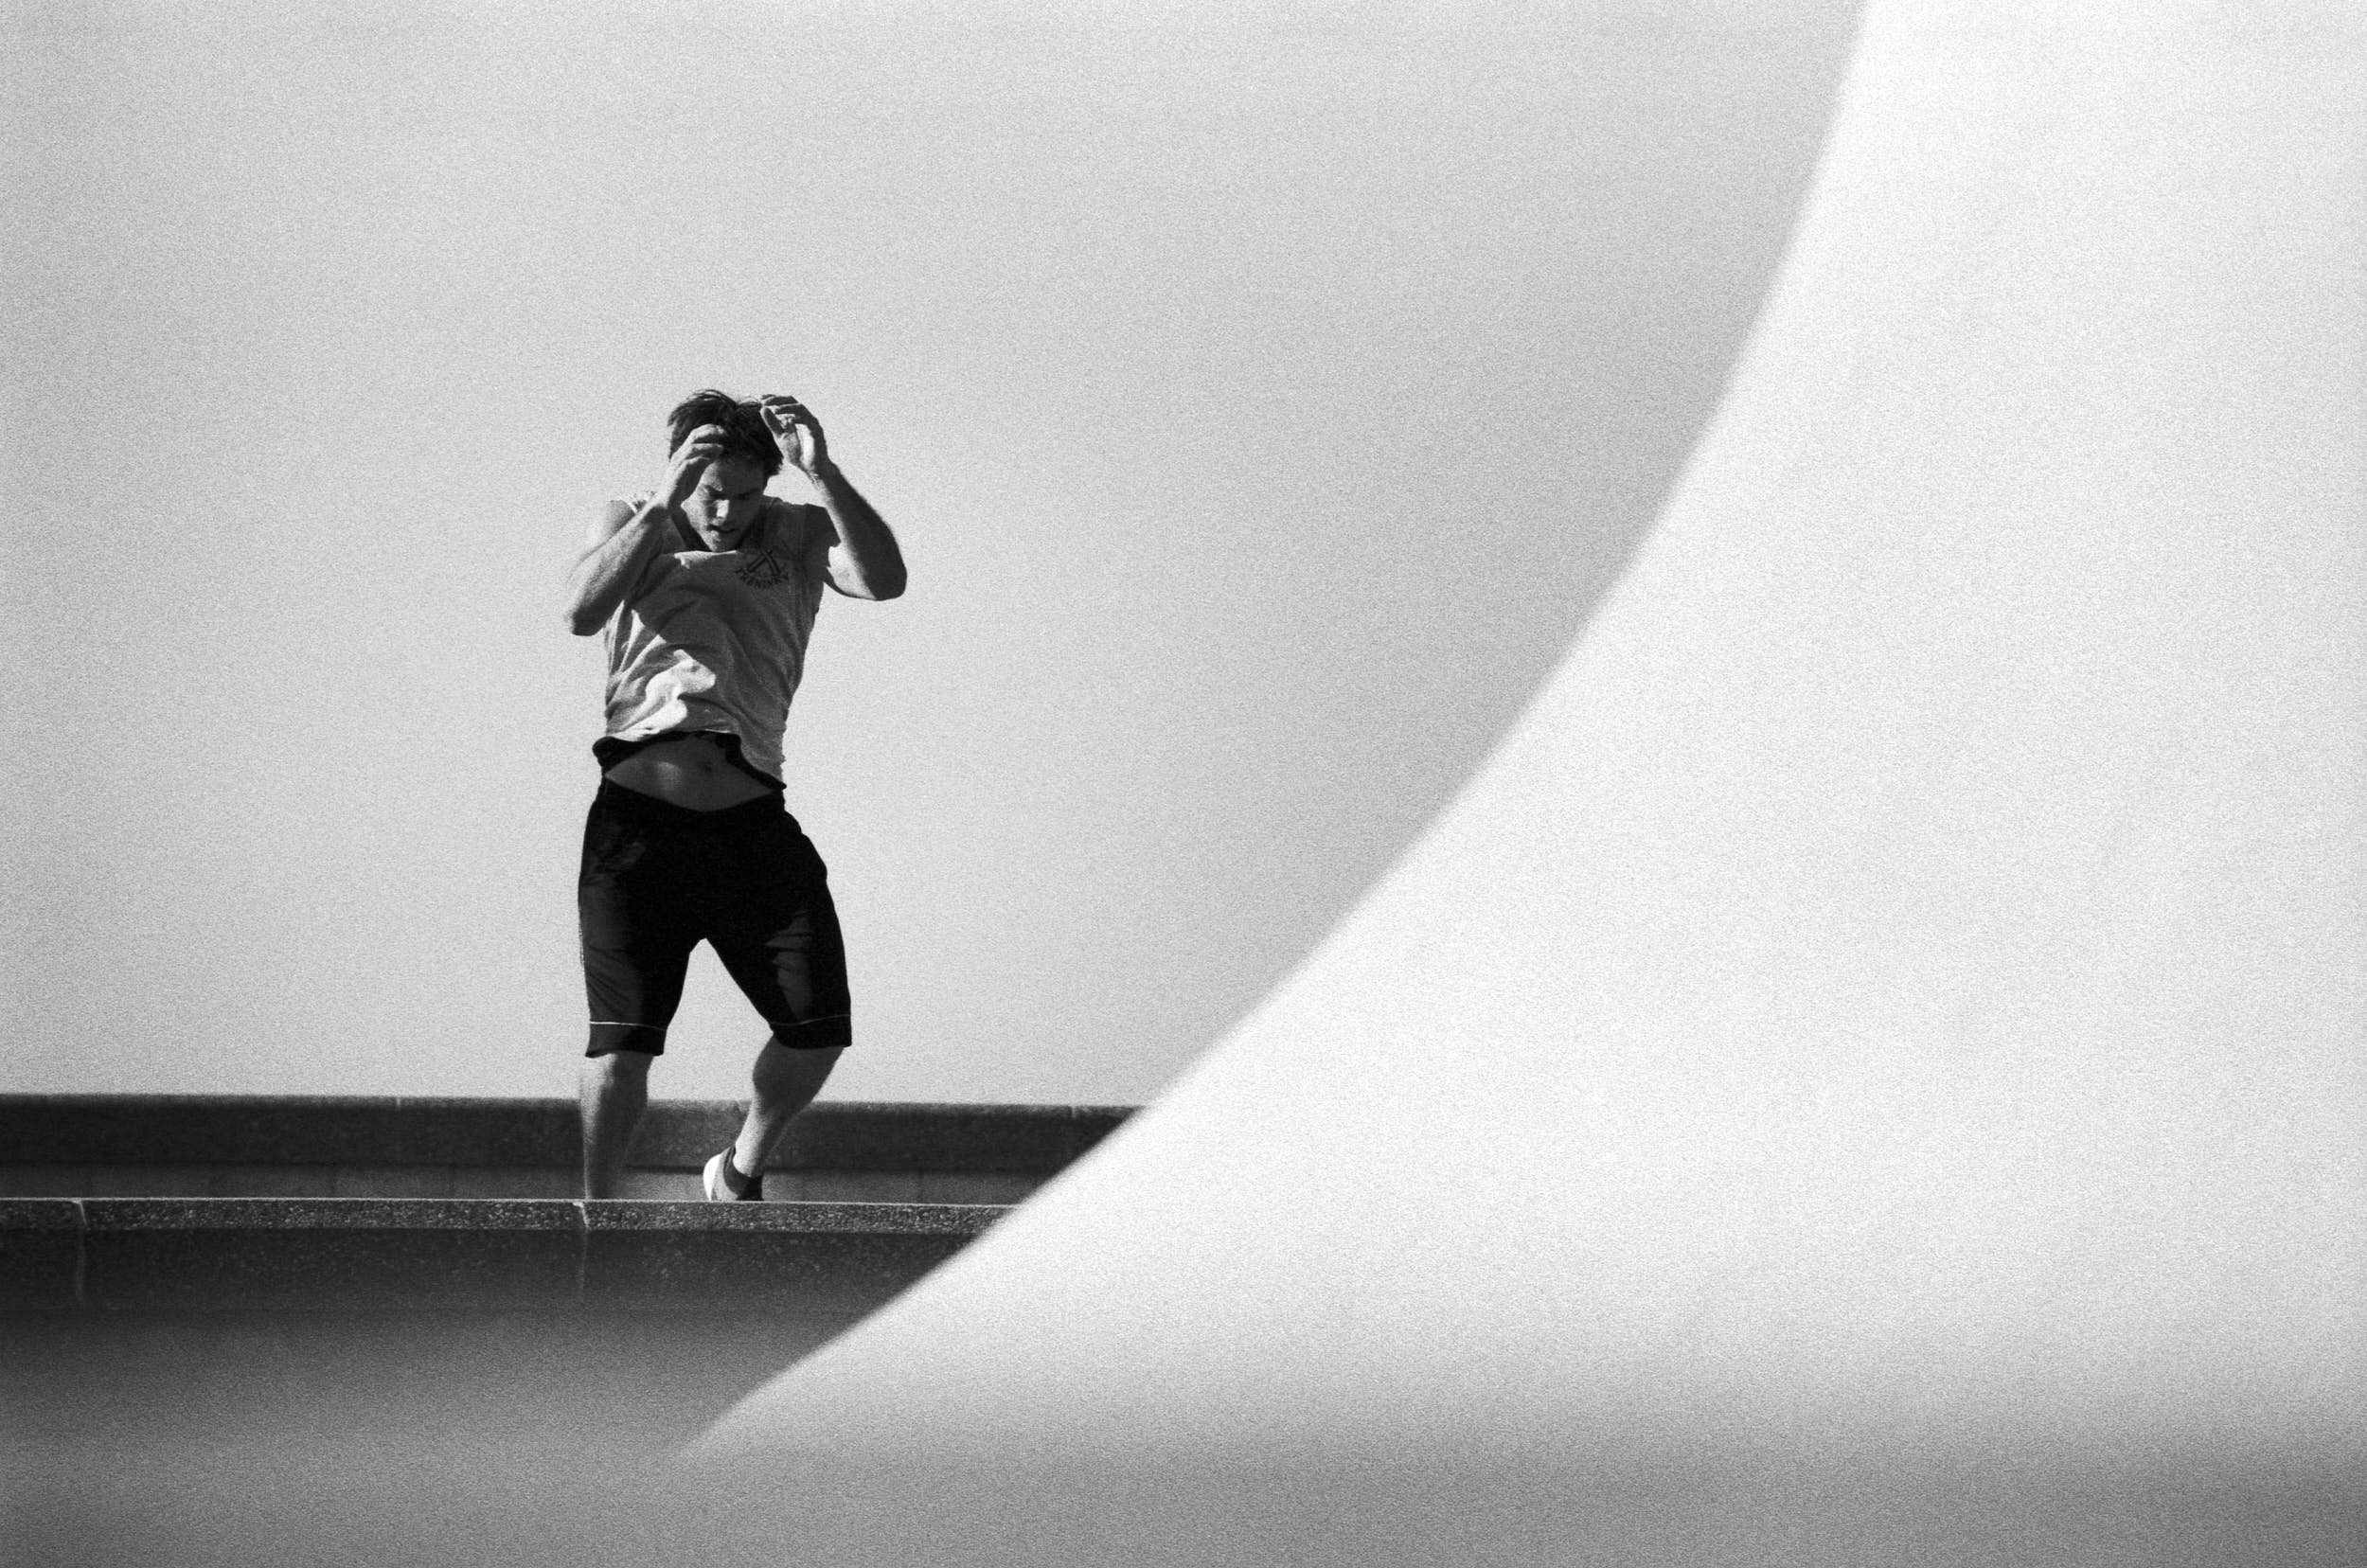 Fitness athlete working out in a black and white geometrical composition.